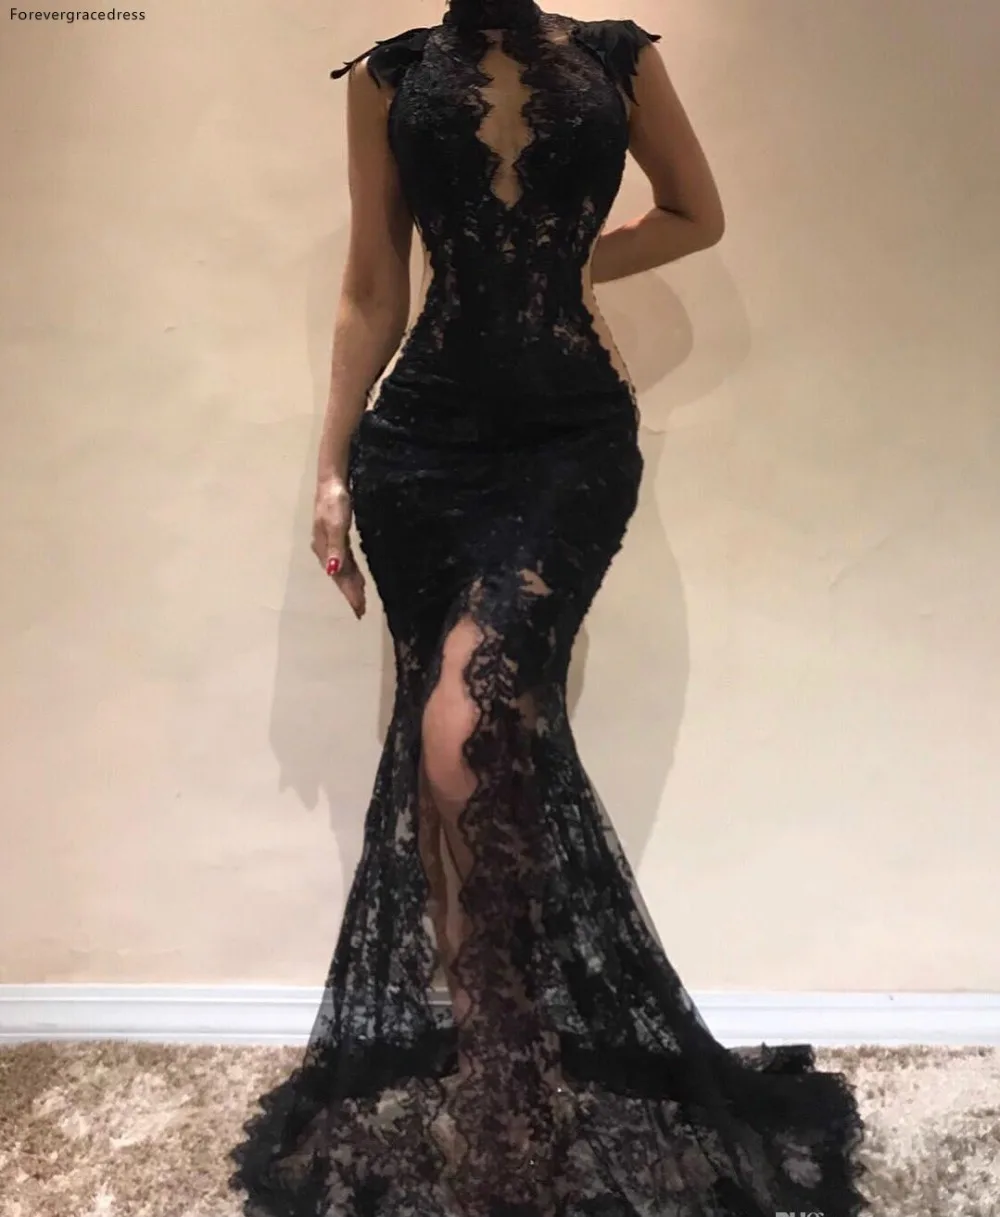 2019 New Sexy High Neck Black Lace Mermaid Prom Dresses Capped Sleeves Front Split Evening Dresses Cutaway Sides Party Gowns BC0513  129 (1)